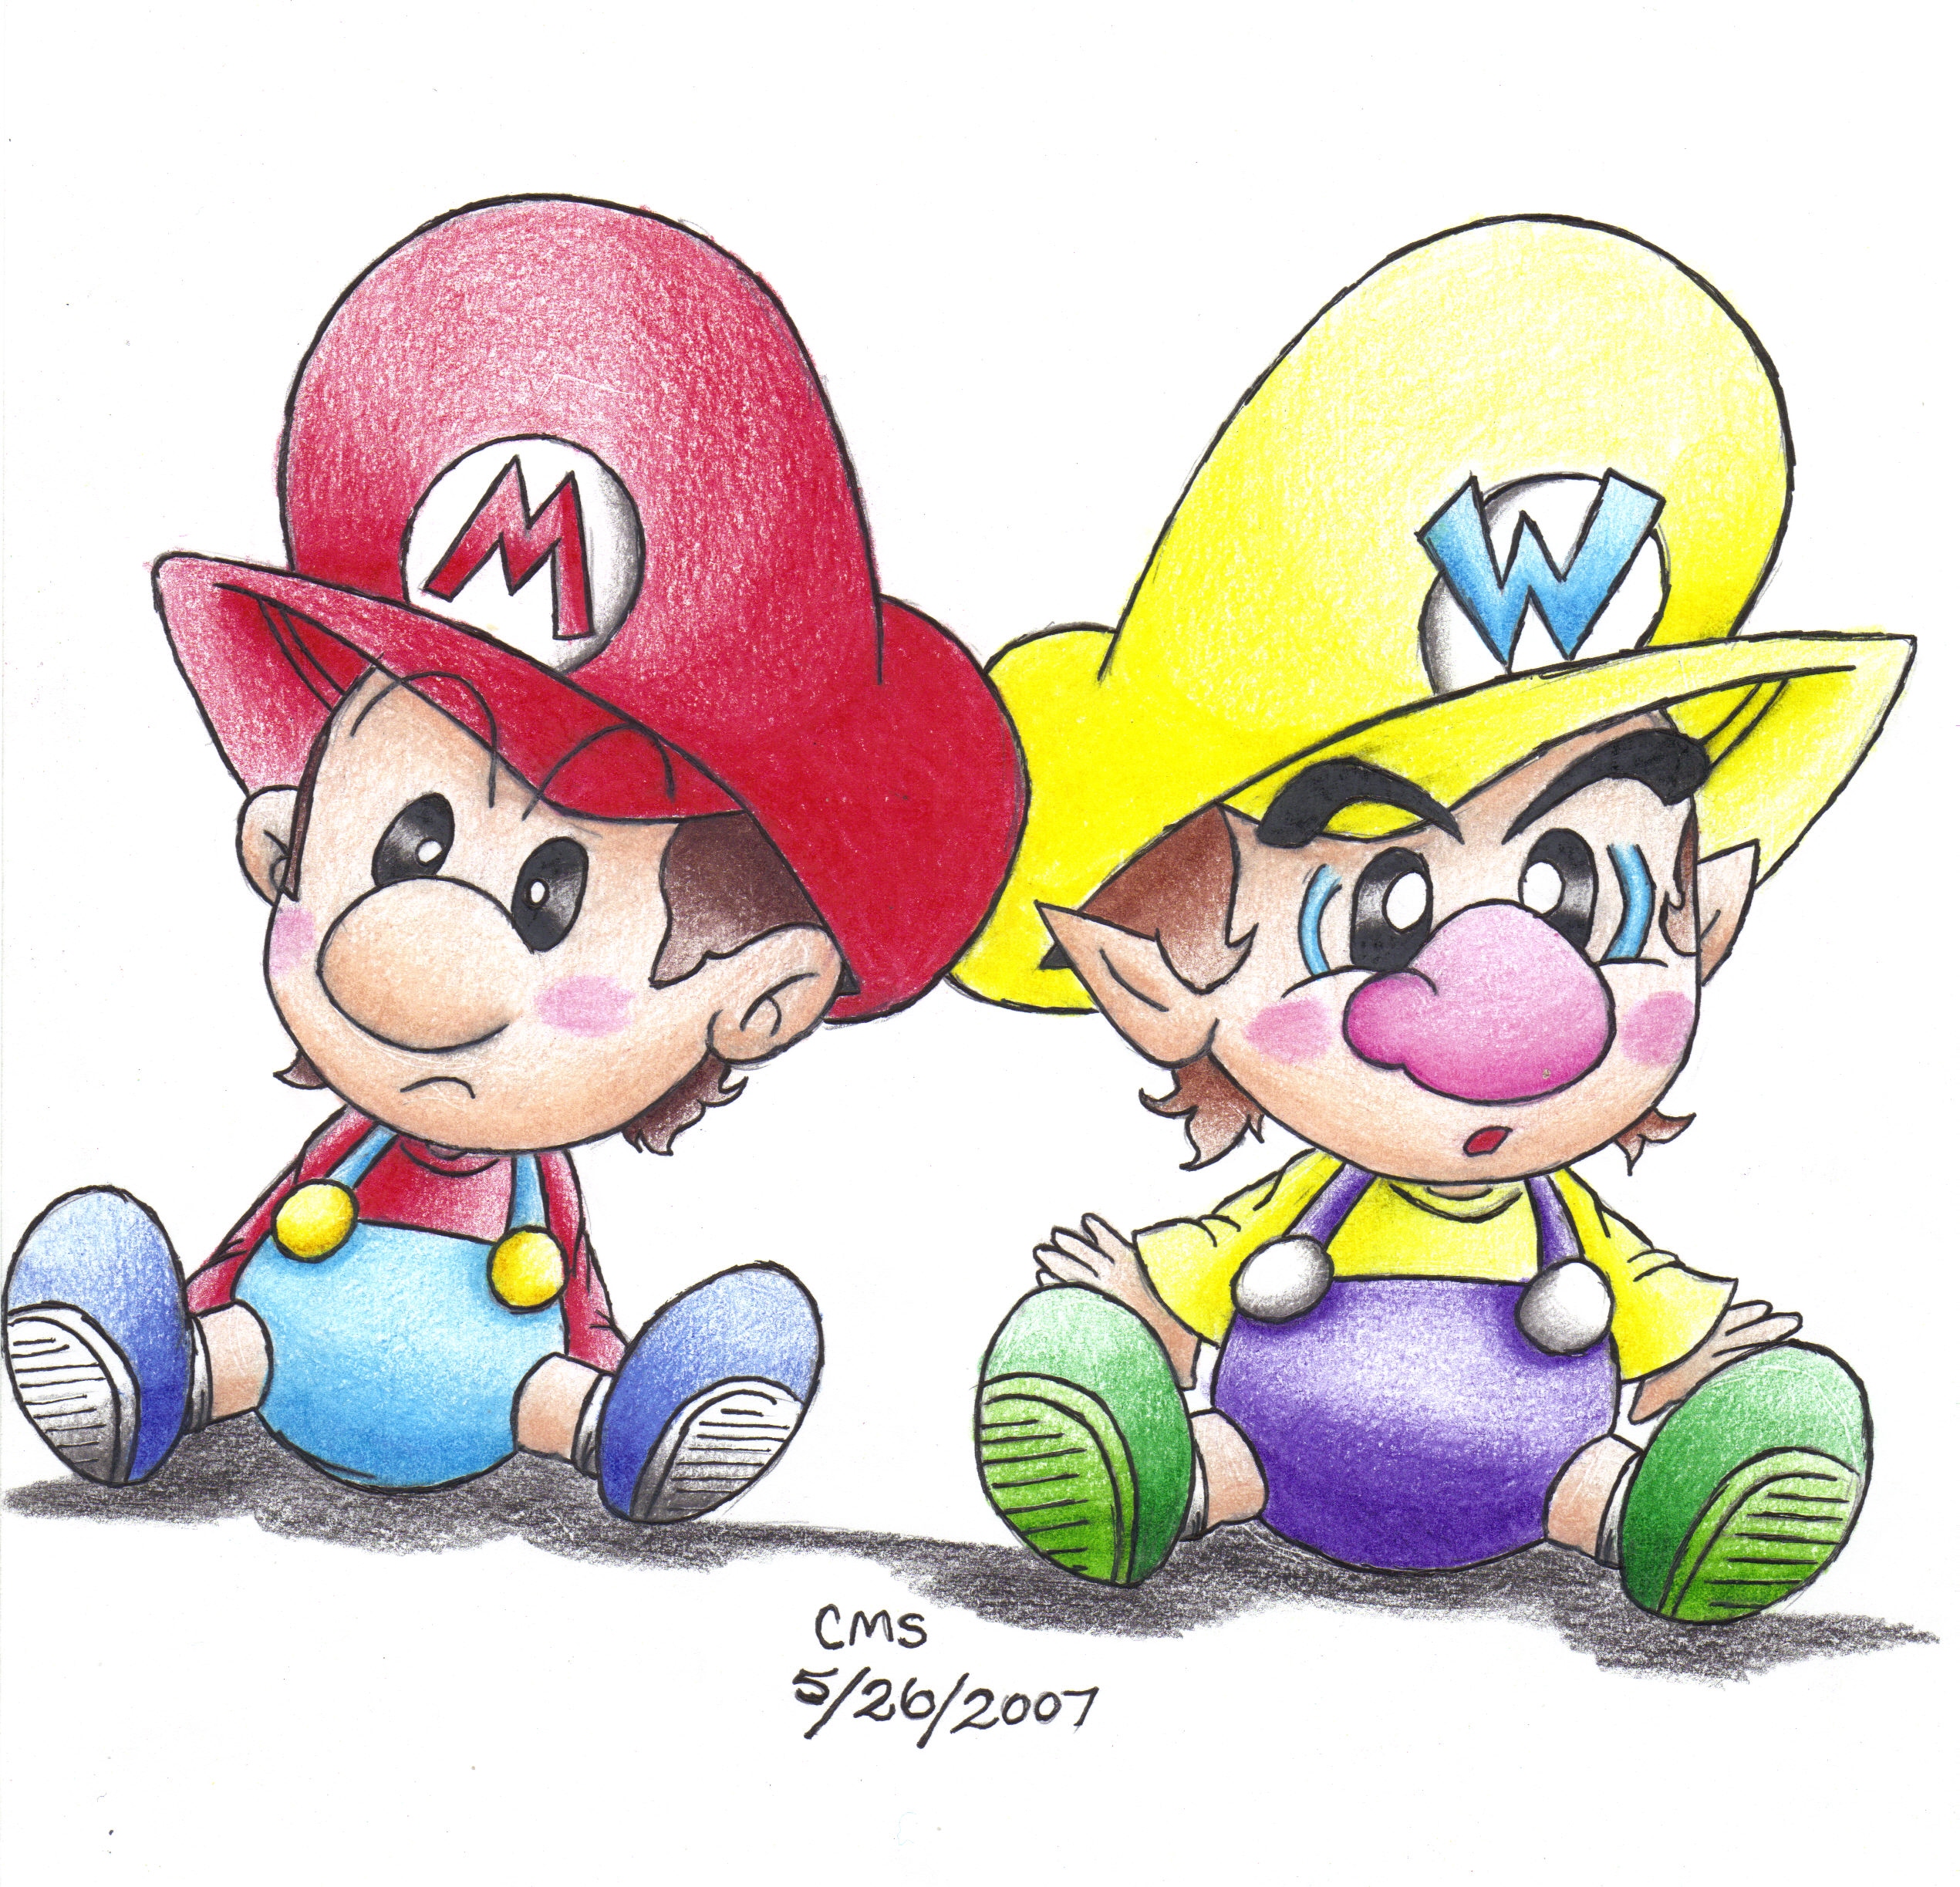 Baby Mario and Baby Wario (version 2) by sillysimeongurl